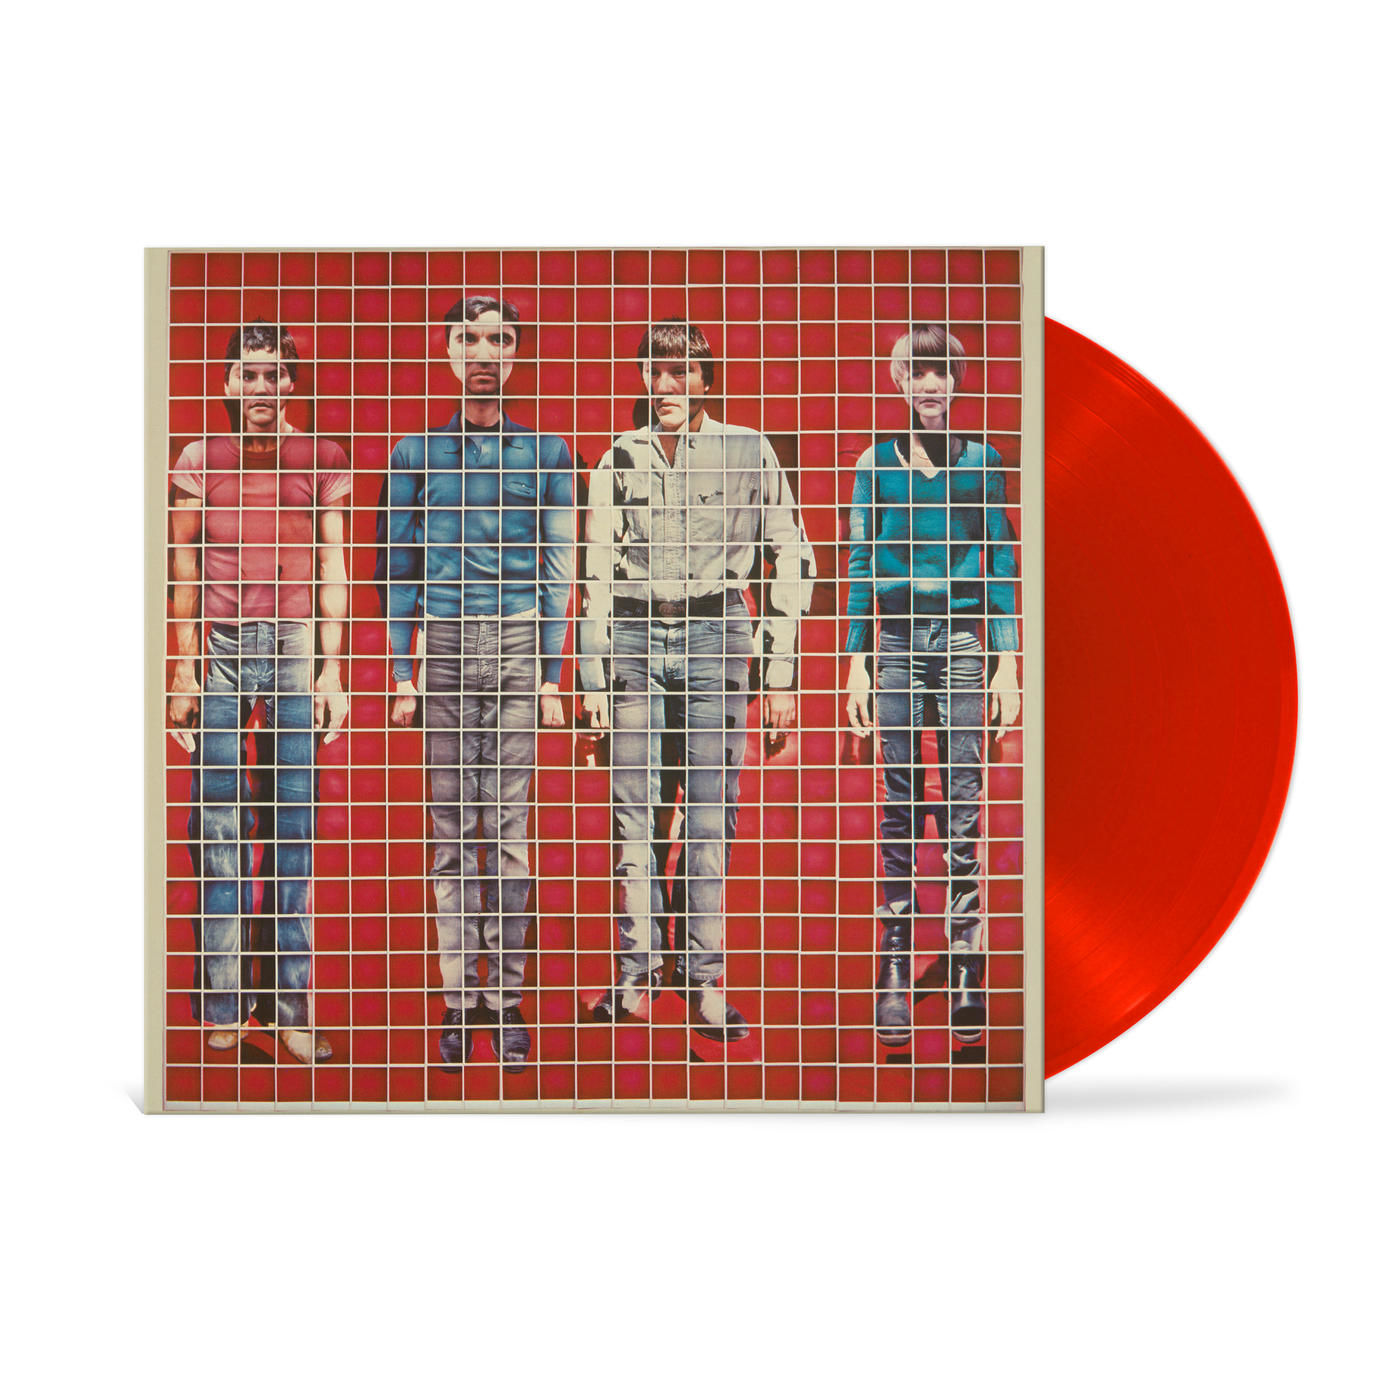 More Songs About Buildings And Food: Limited Edition Red Vinyl LP